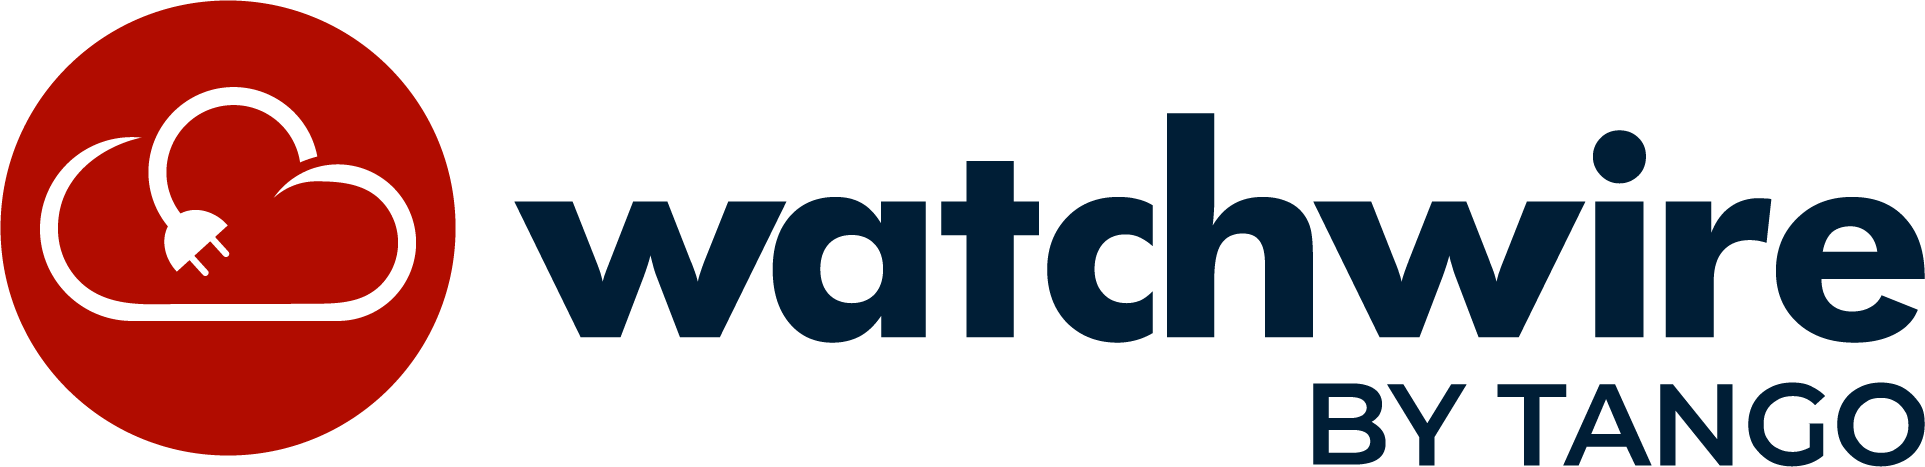 Watchwire by Tango logo